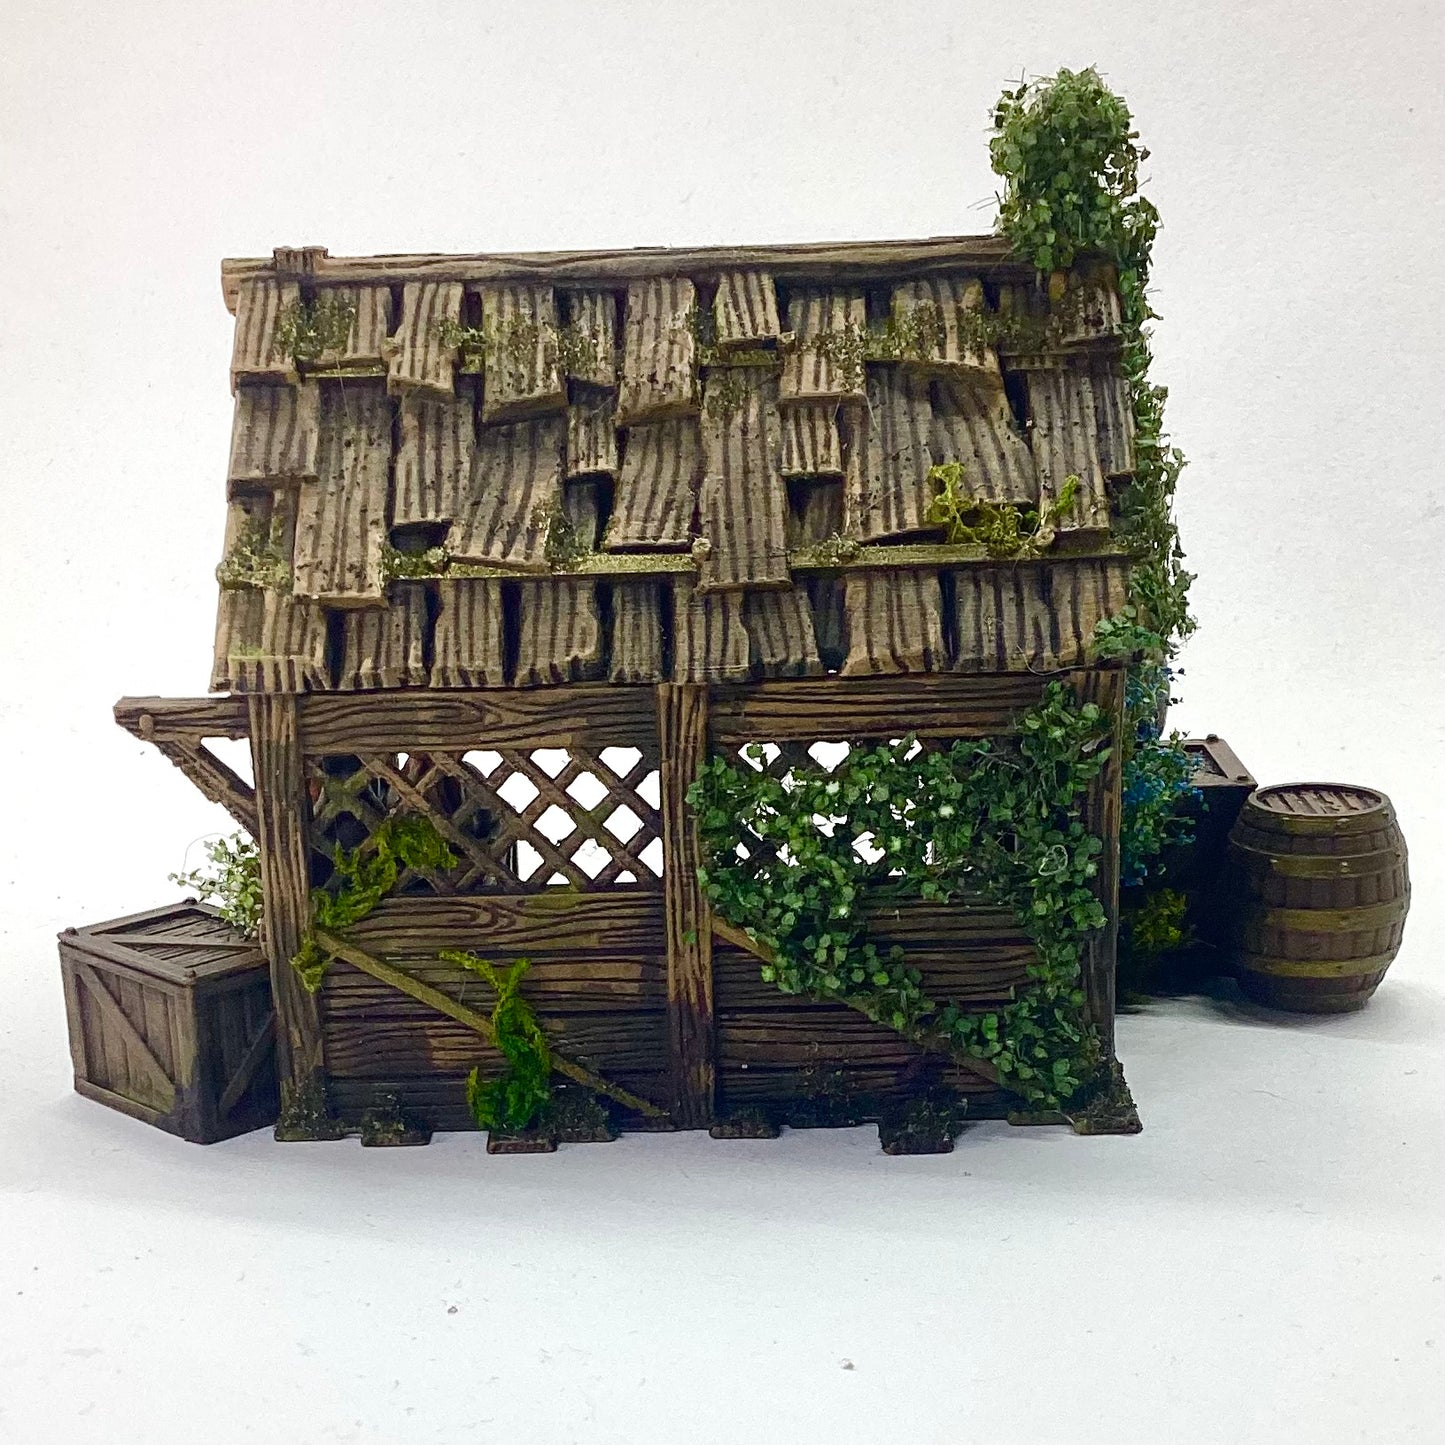 28mm Miniature Building - Market Stall fully painted and complete (3dp4u)